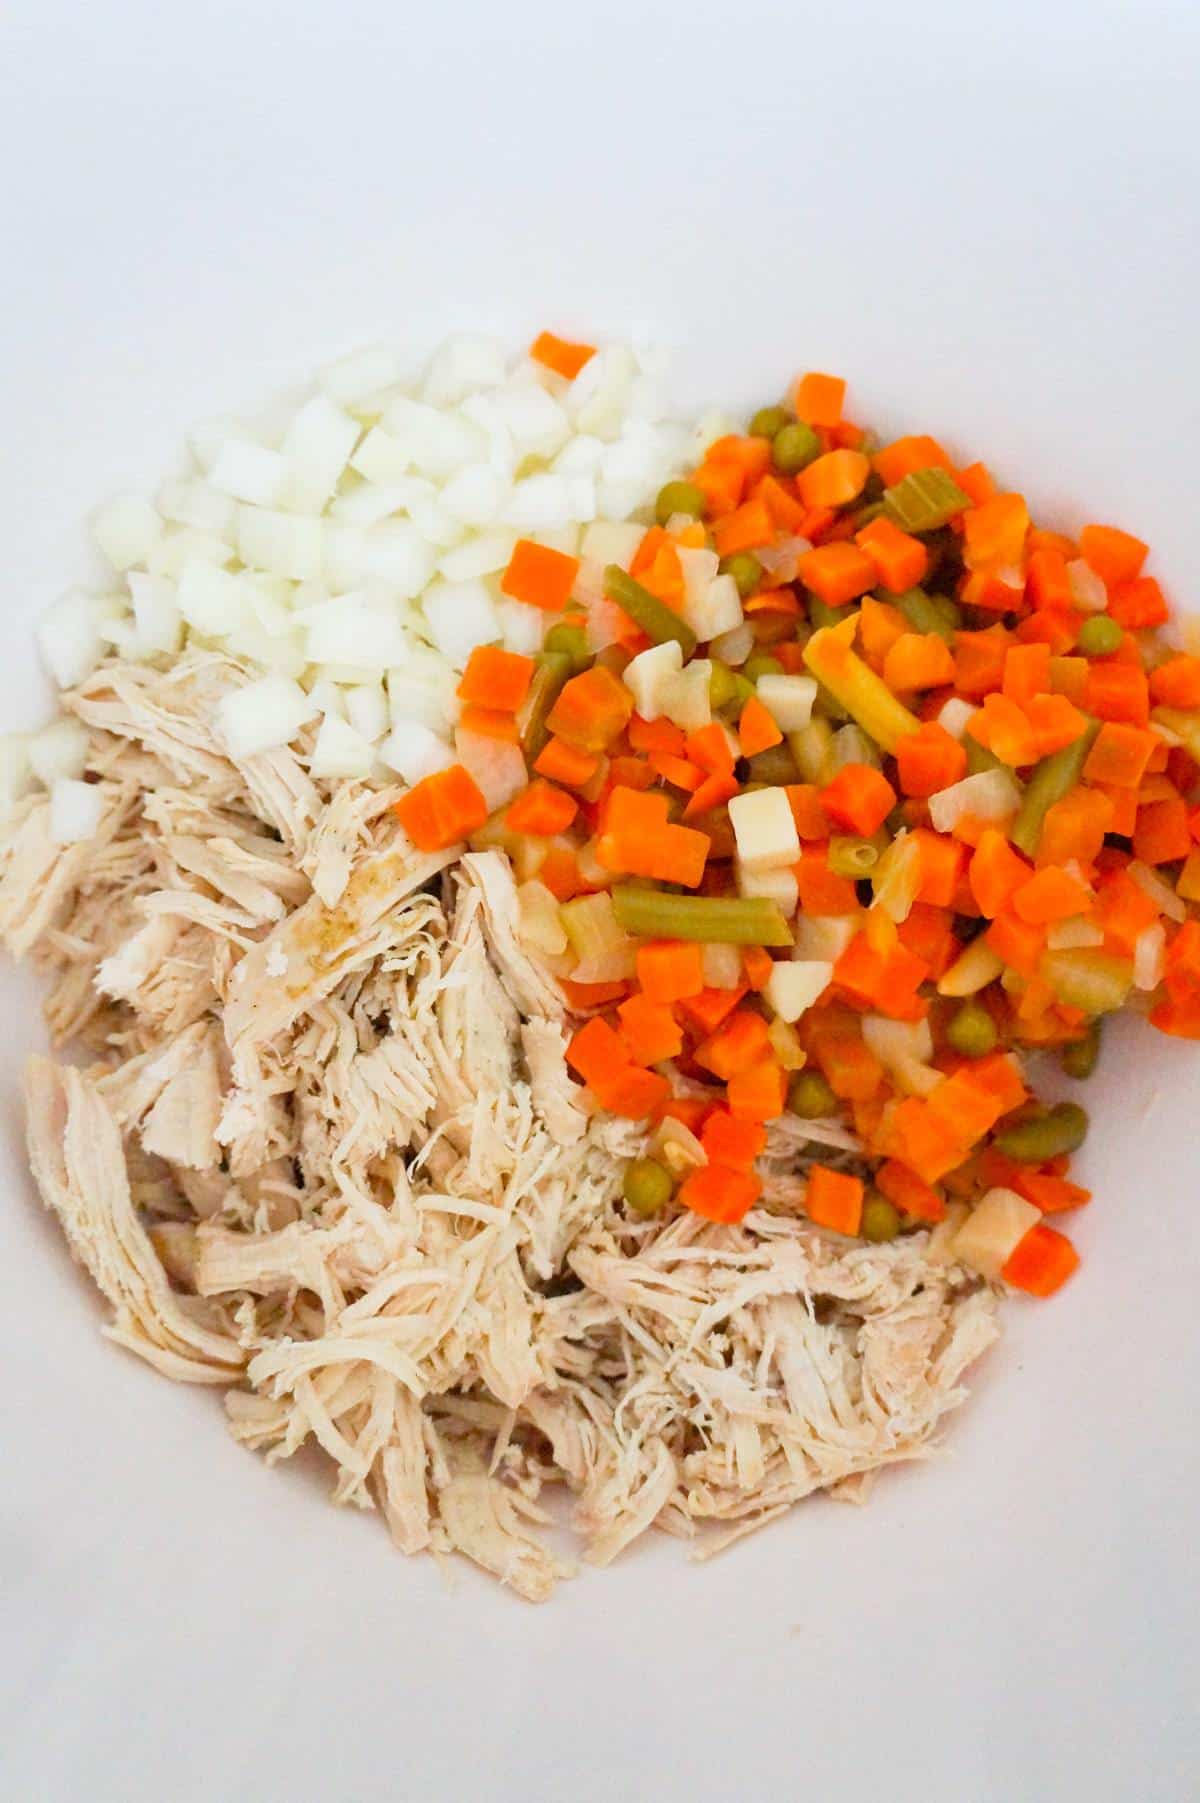 shredded chicken, diced onions and mixed veggies in a mixing bowl